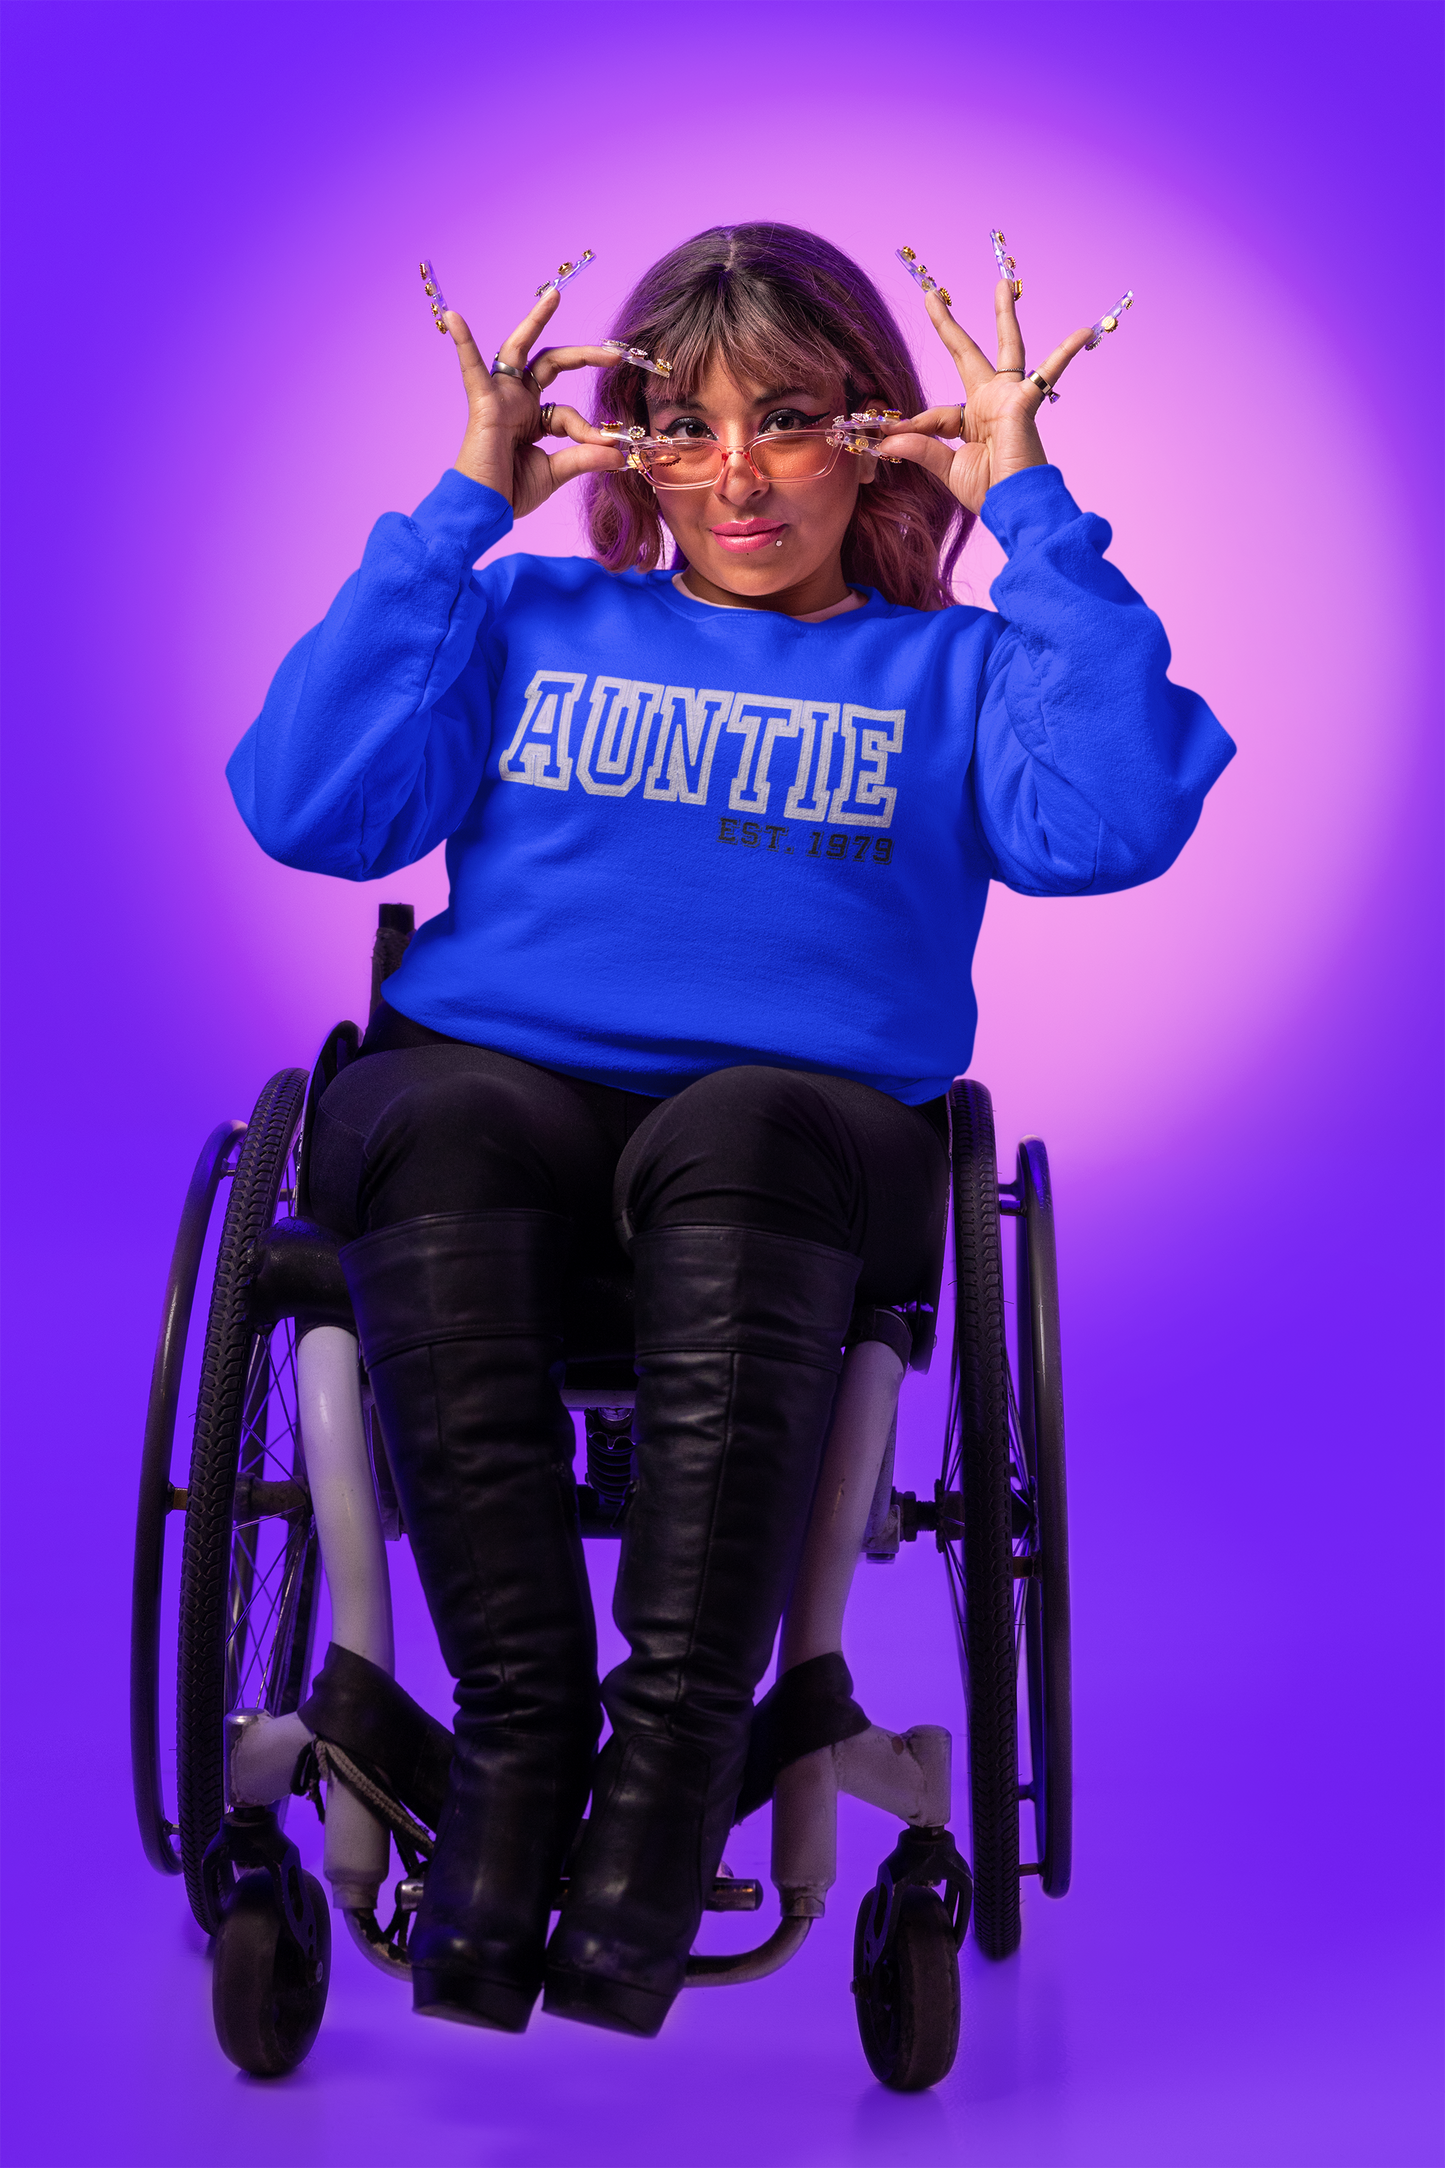 A lady in a wheel chair with a blue sweatshirt that reads "Auntie est 1979"